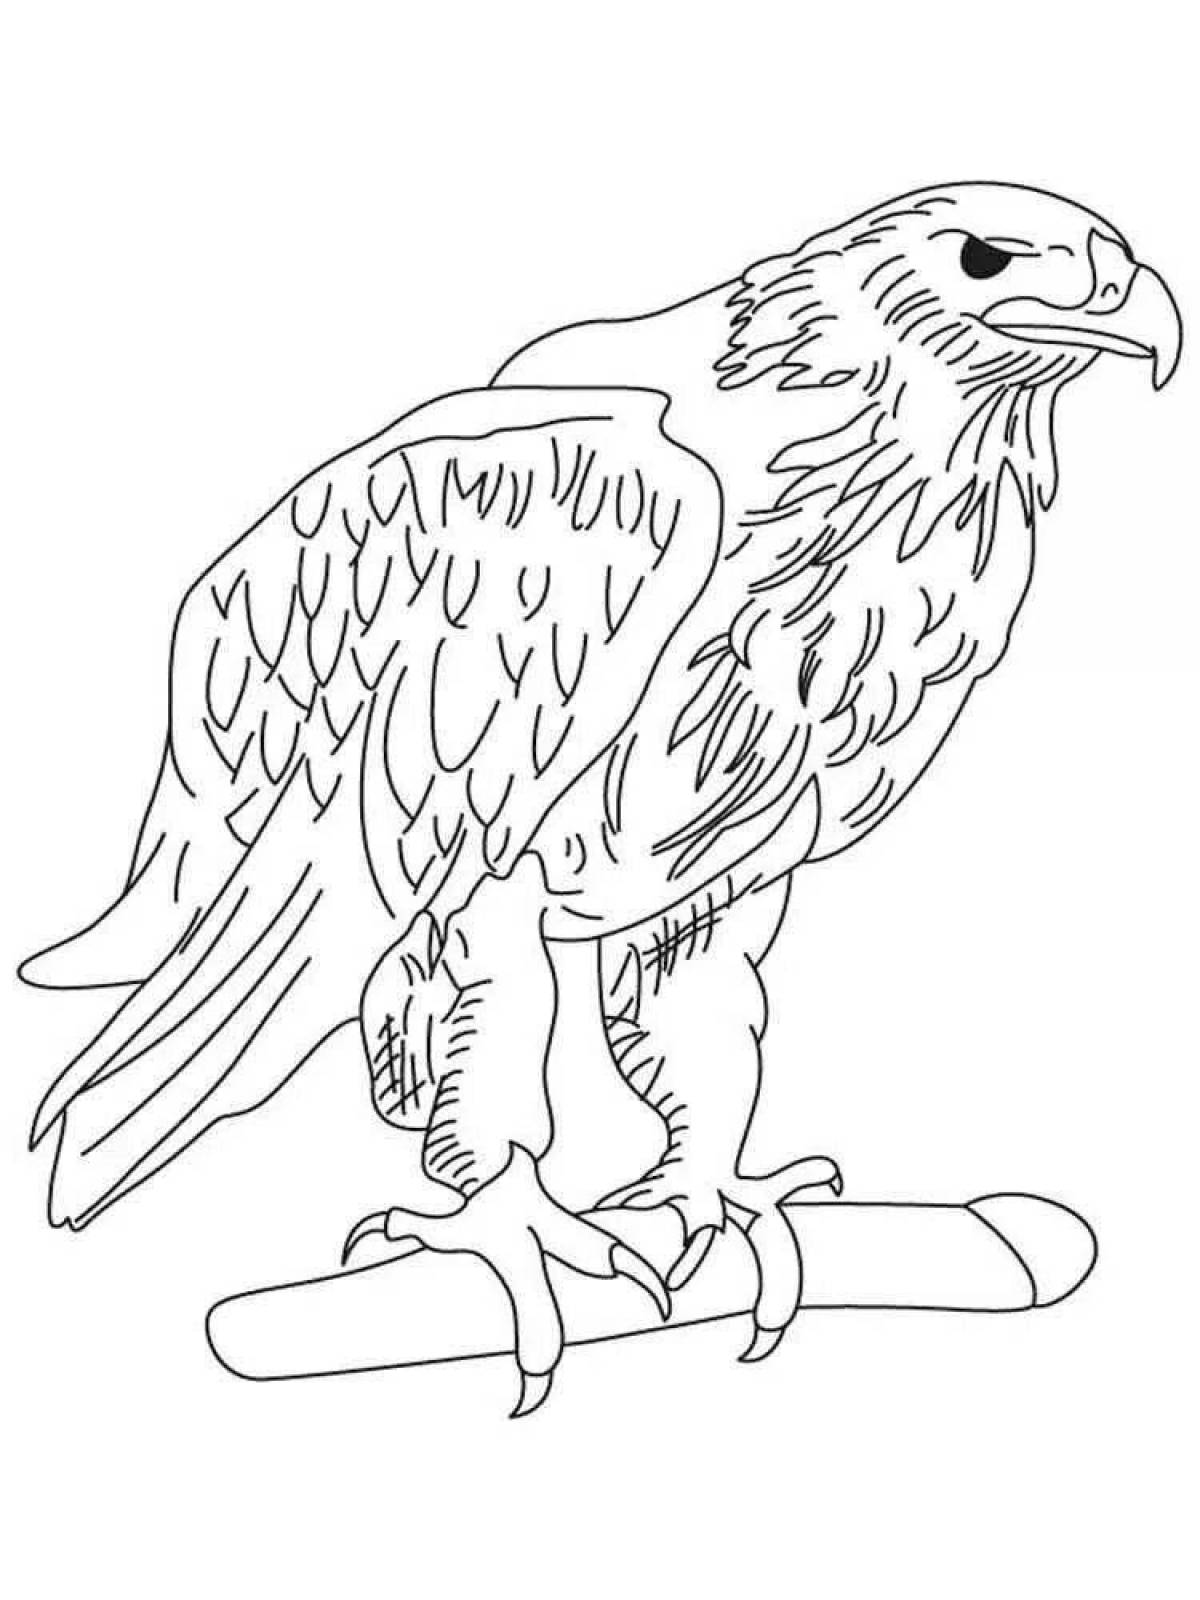 Shiny eagle coloring pages for kids